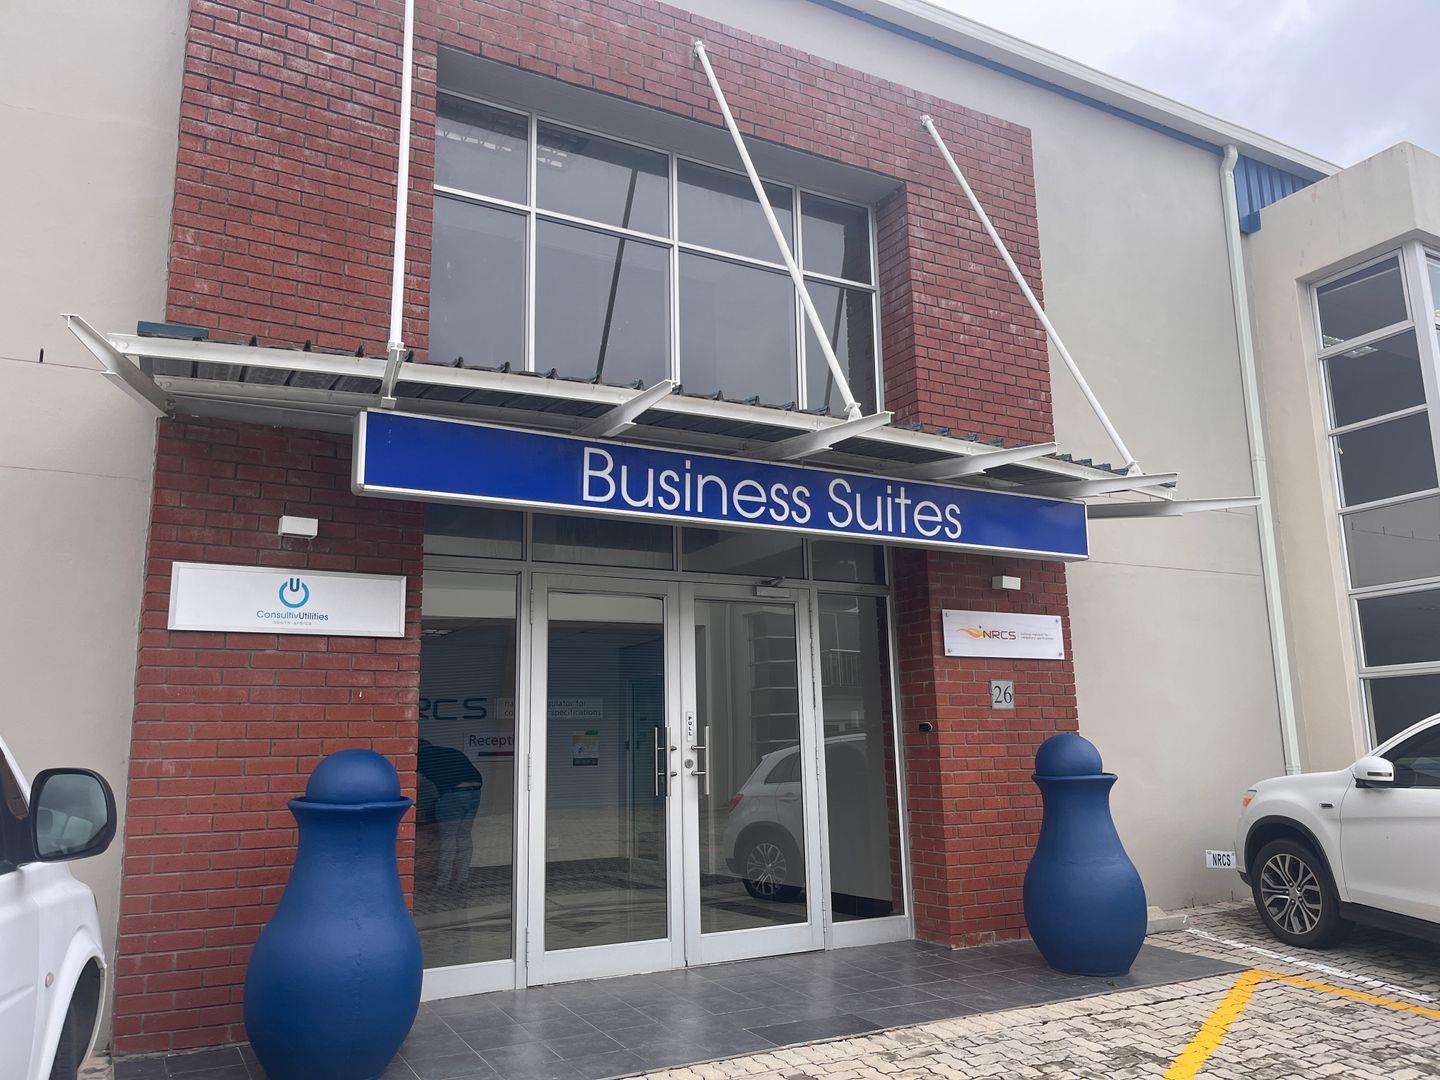 Commercial property to rent in Fairview - 141 Willow Road - 300m²